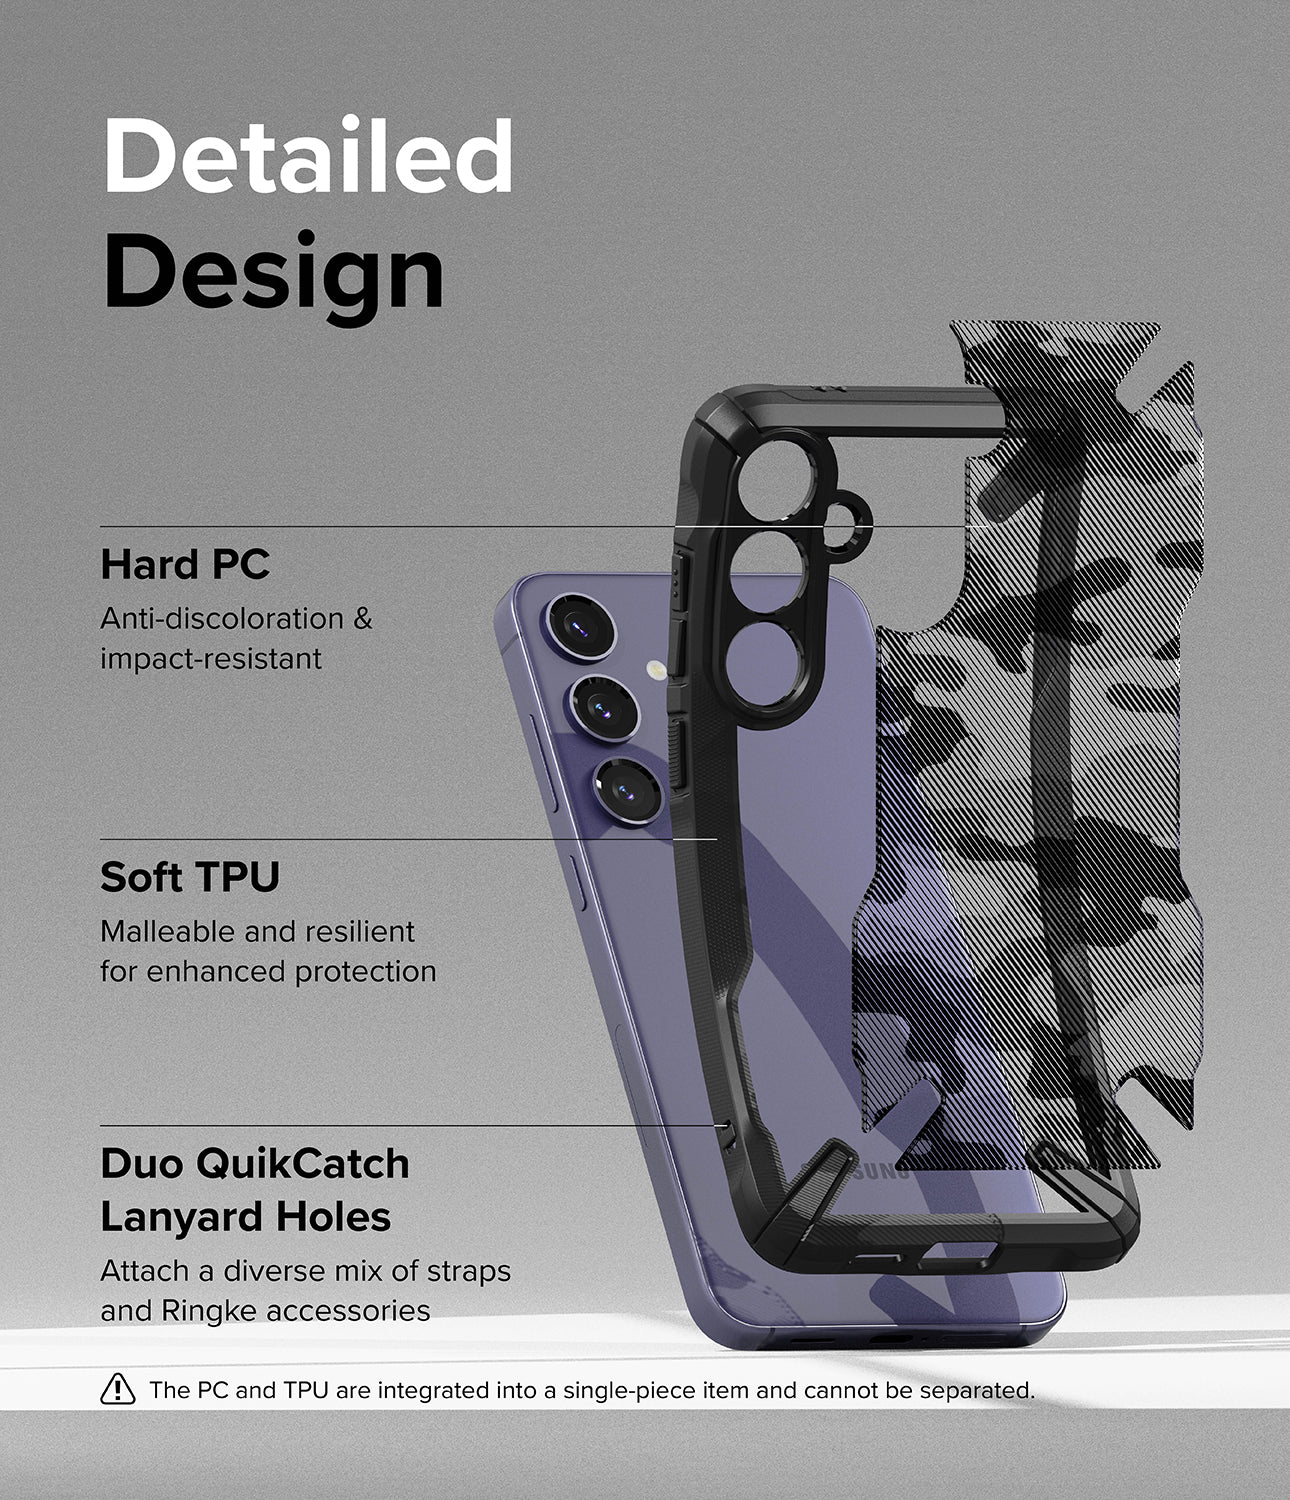 Galaxy S24 Case | Fusion-X -Detailed Design. Anti-discoloration and impact-resistant with Hard PC. Malleable and resilient for enhanced protection with Soft TPU. Duo QuikCatch Lanyard Holes to attach a diverse mix of straps and Ringke accessories.